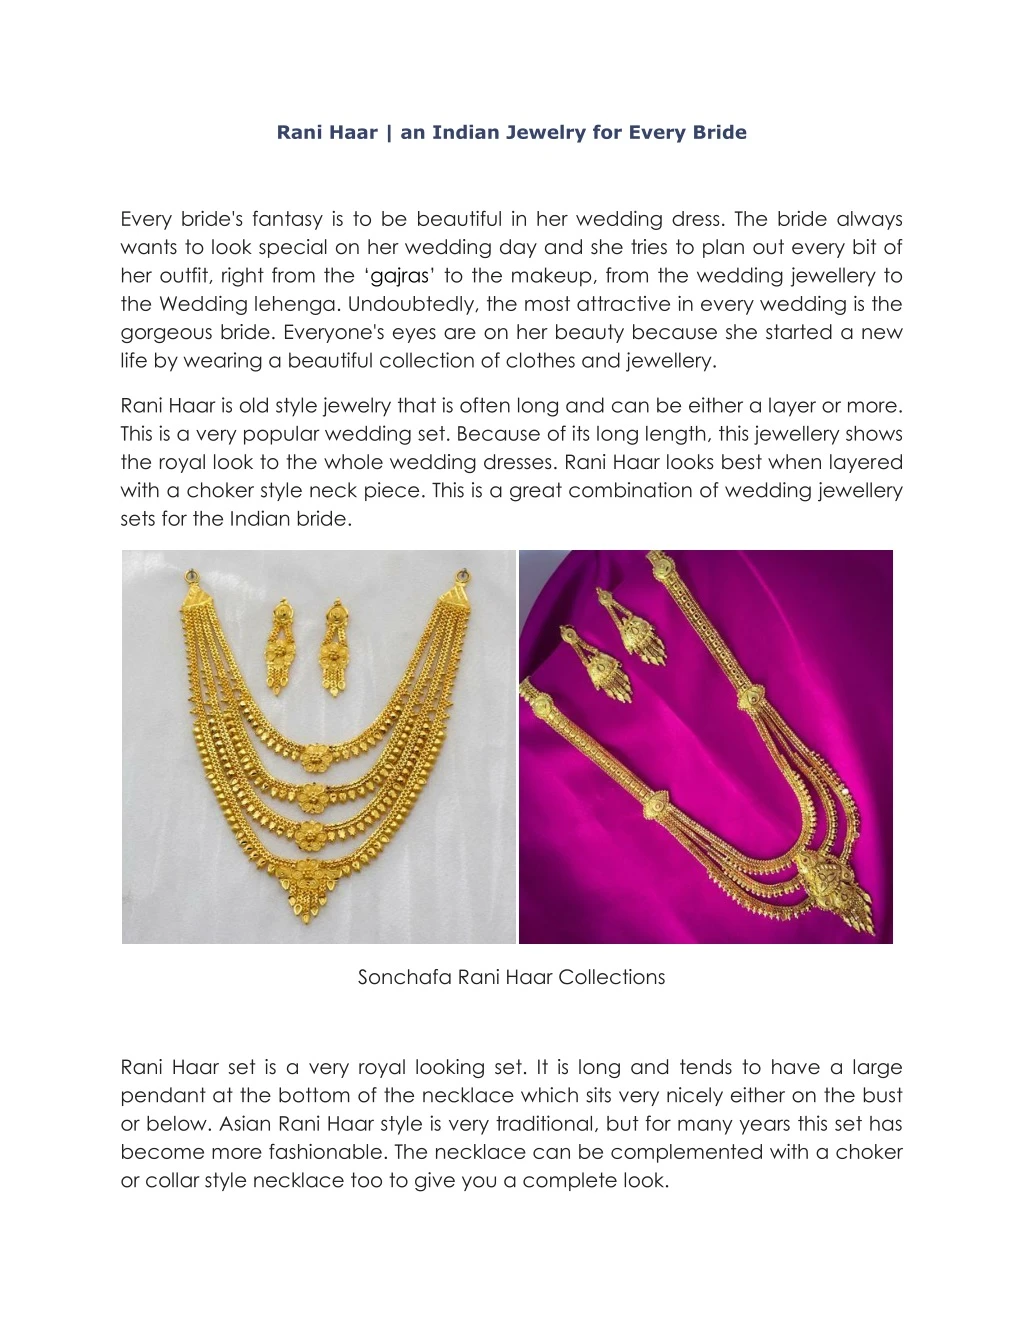 rani haar an indian jewelry for every bride